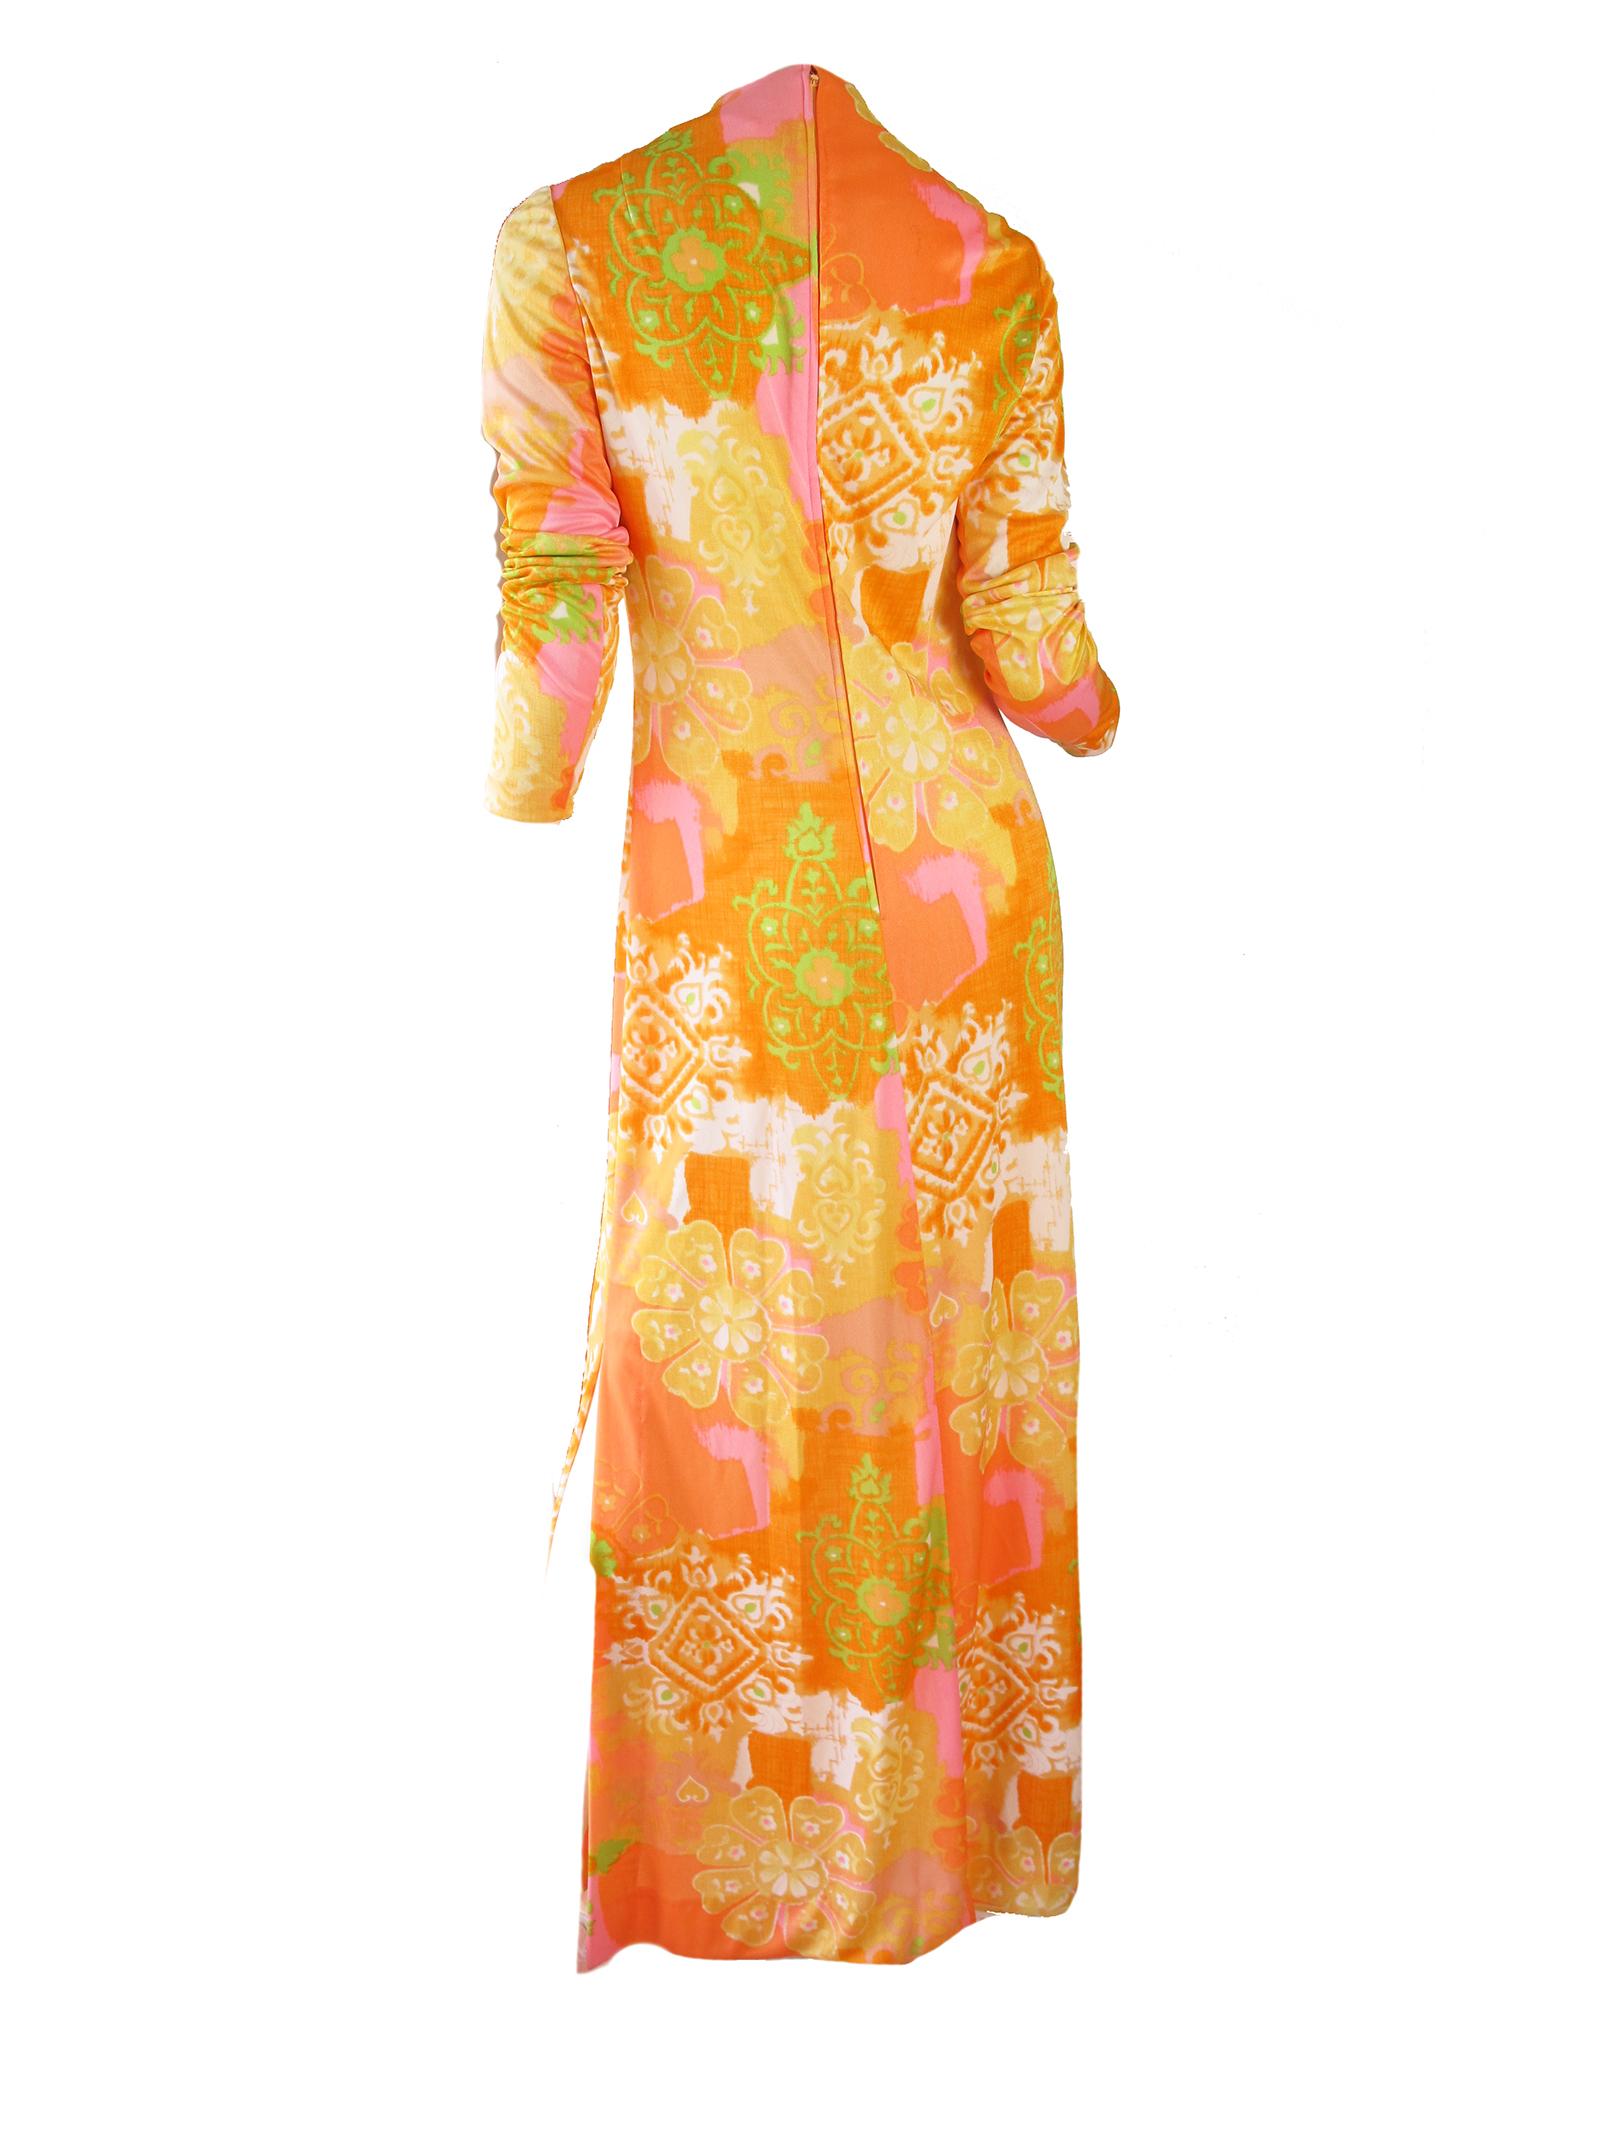 1970s Anne Fogarty floral print gown.  Polyester fabric. Condition: Excellent. Size US 8/10 ( mannequin is a US size 6) 

We accept returns for refund.  We offer free ground shipping within the US. 